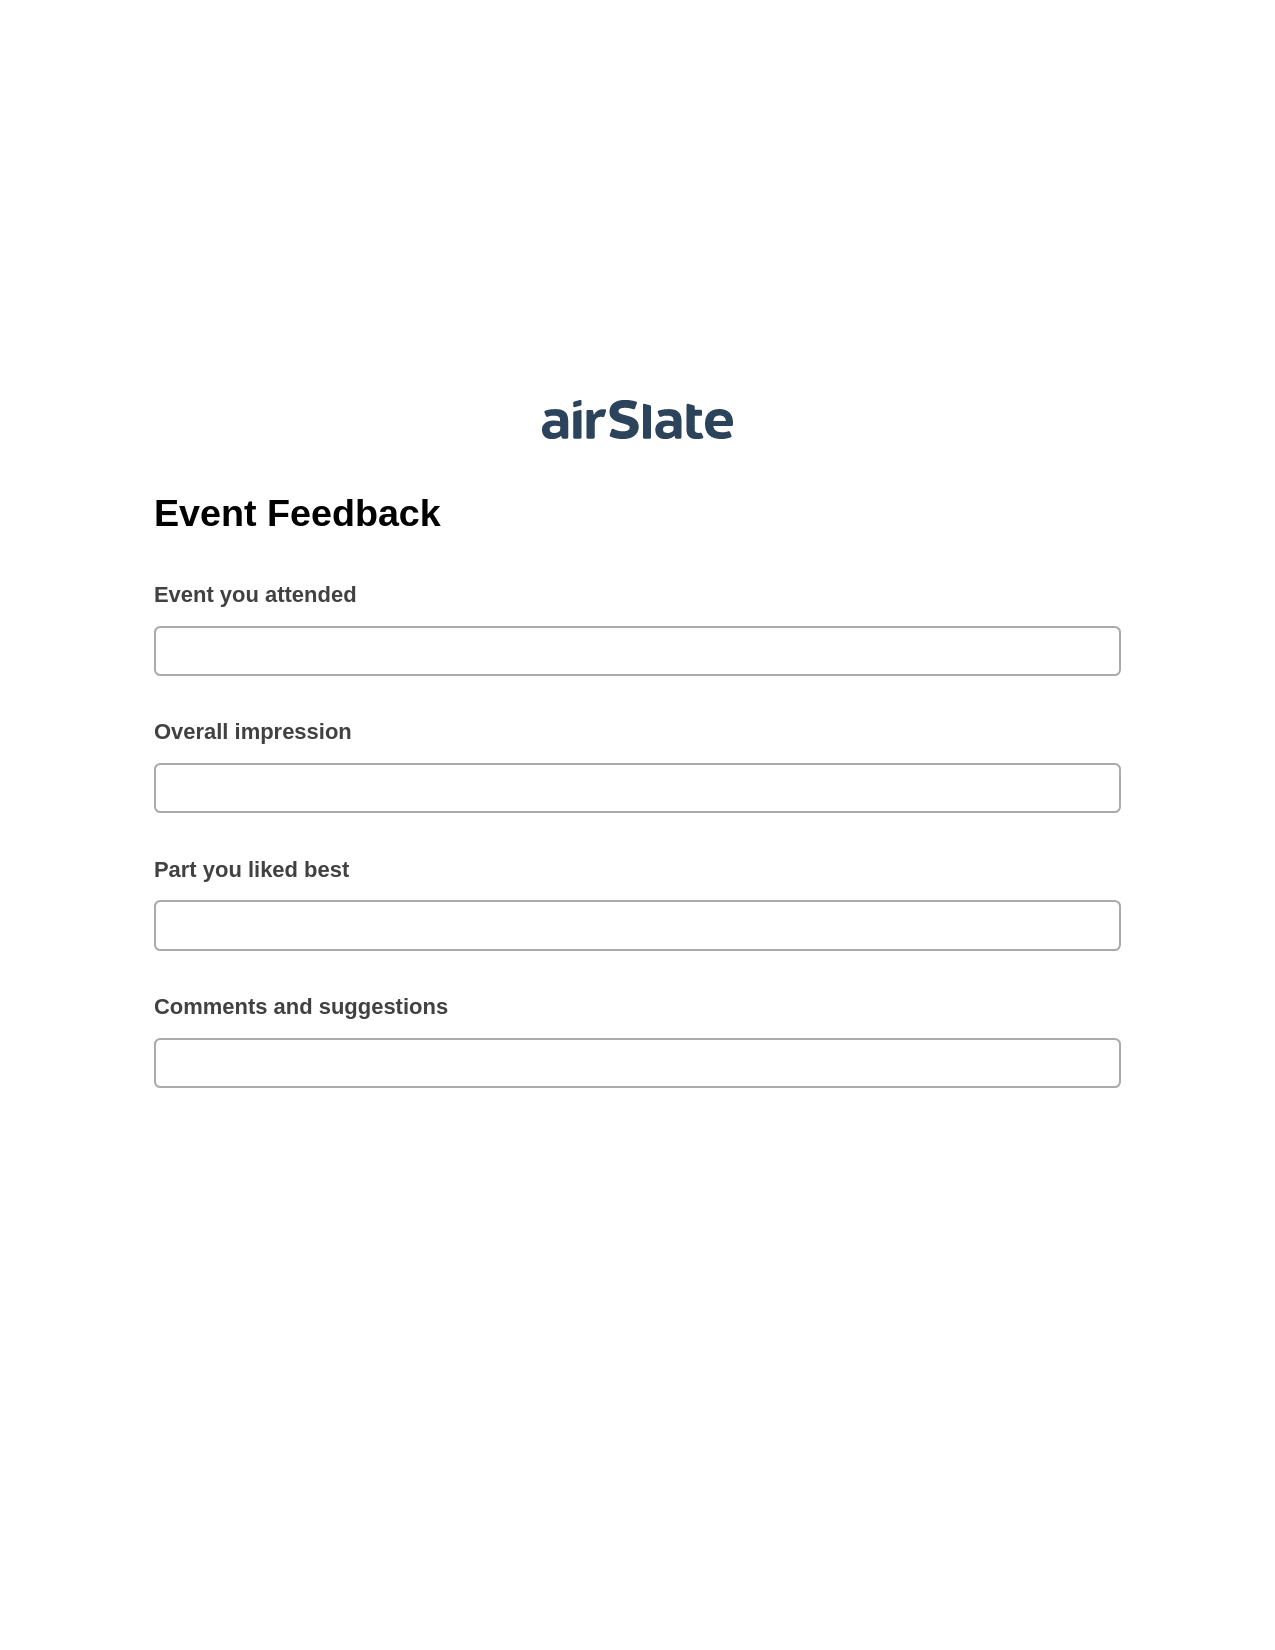 Event Feedback Pre-fill from Salesforce Record Bot, Create slate addon, Slack Two-Way Binding Bot